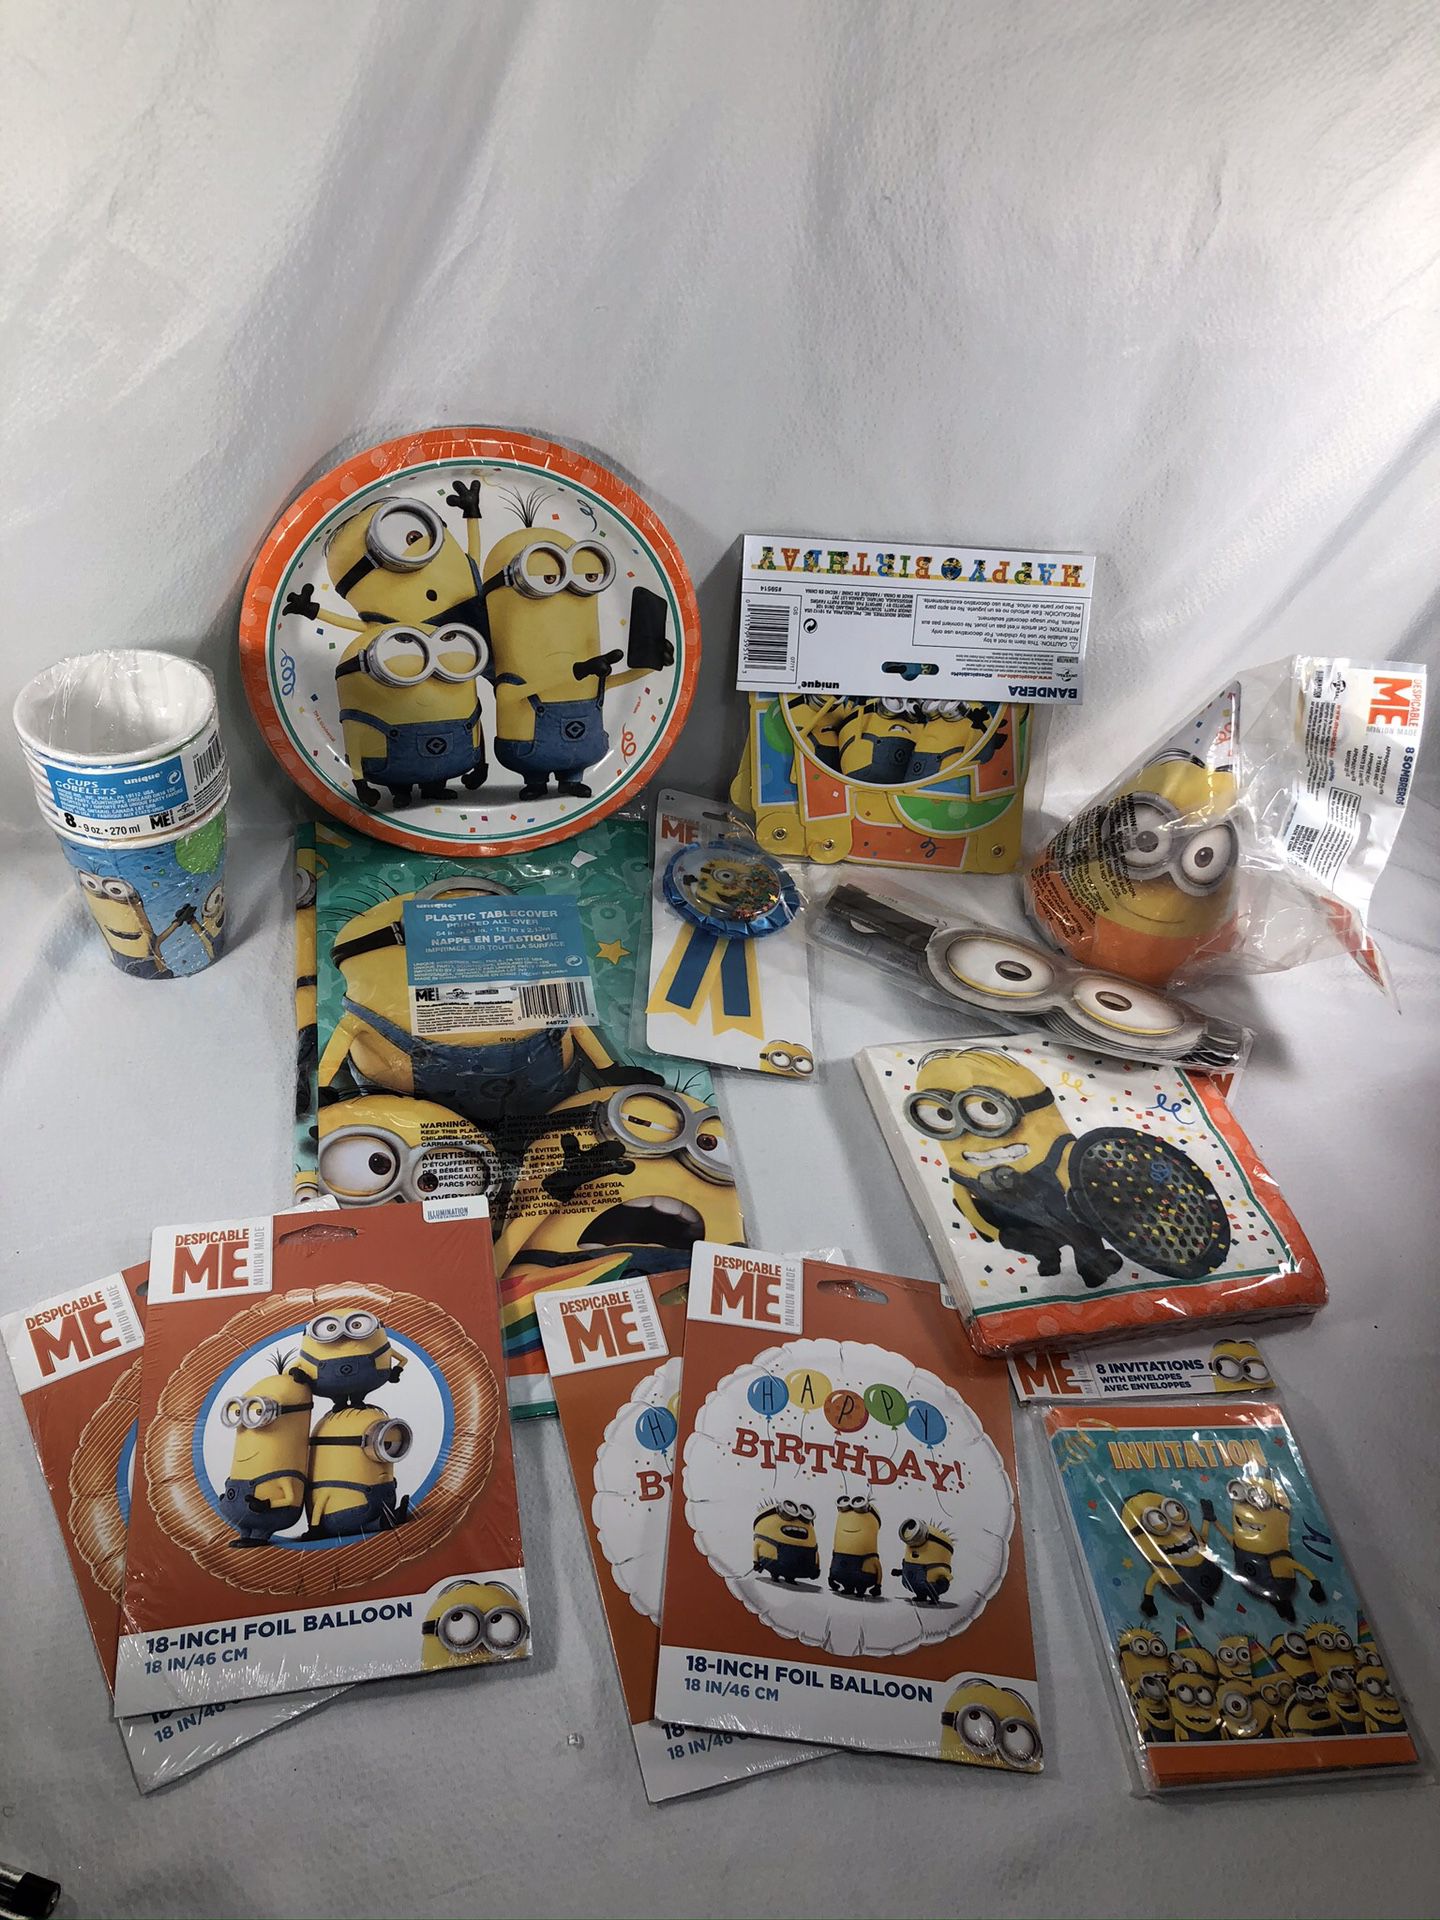 Minions Despicable Me Birthday Party Decor - Plates, Cups, TableCover, Hats, Balloons, Favors